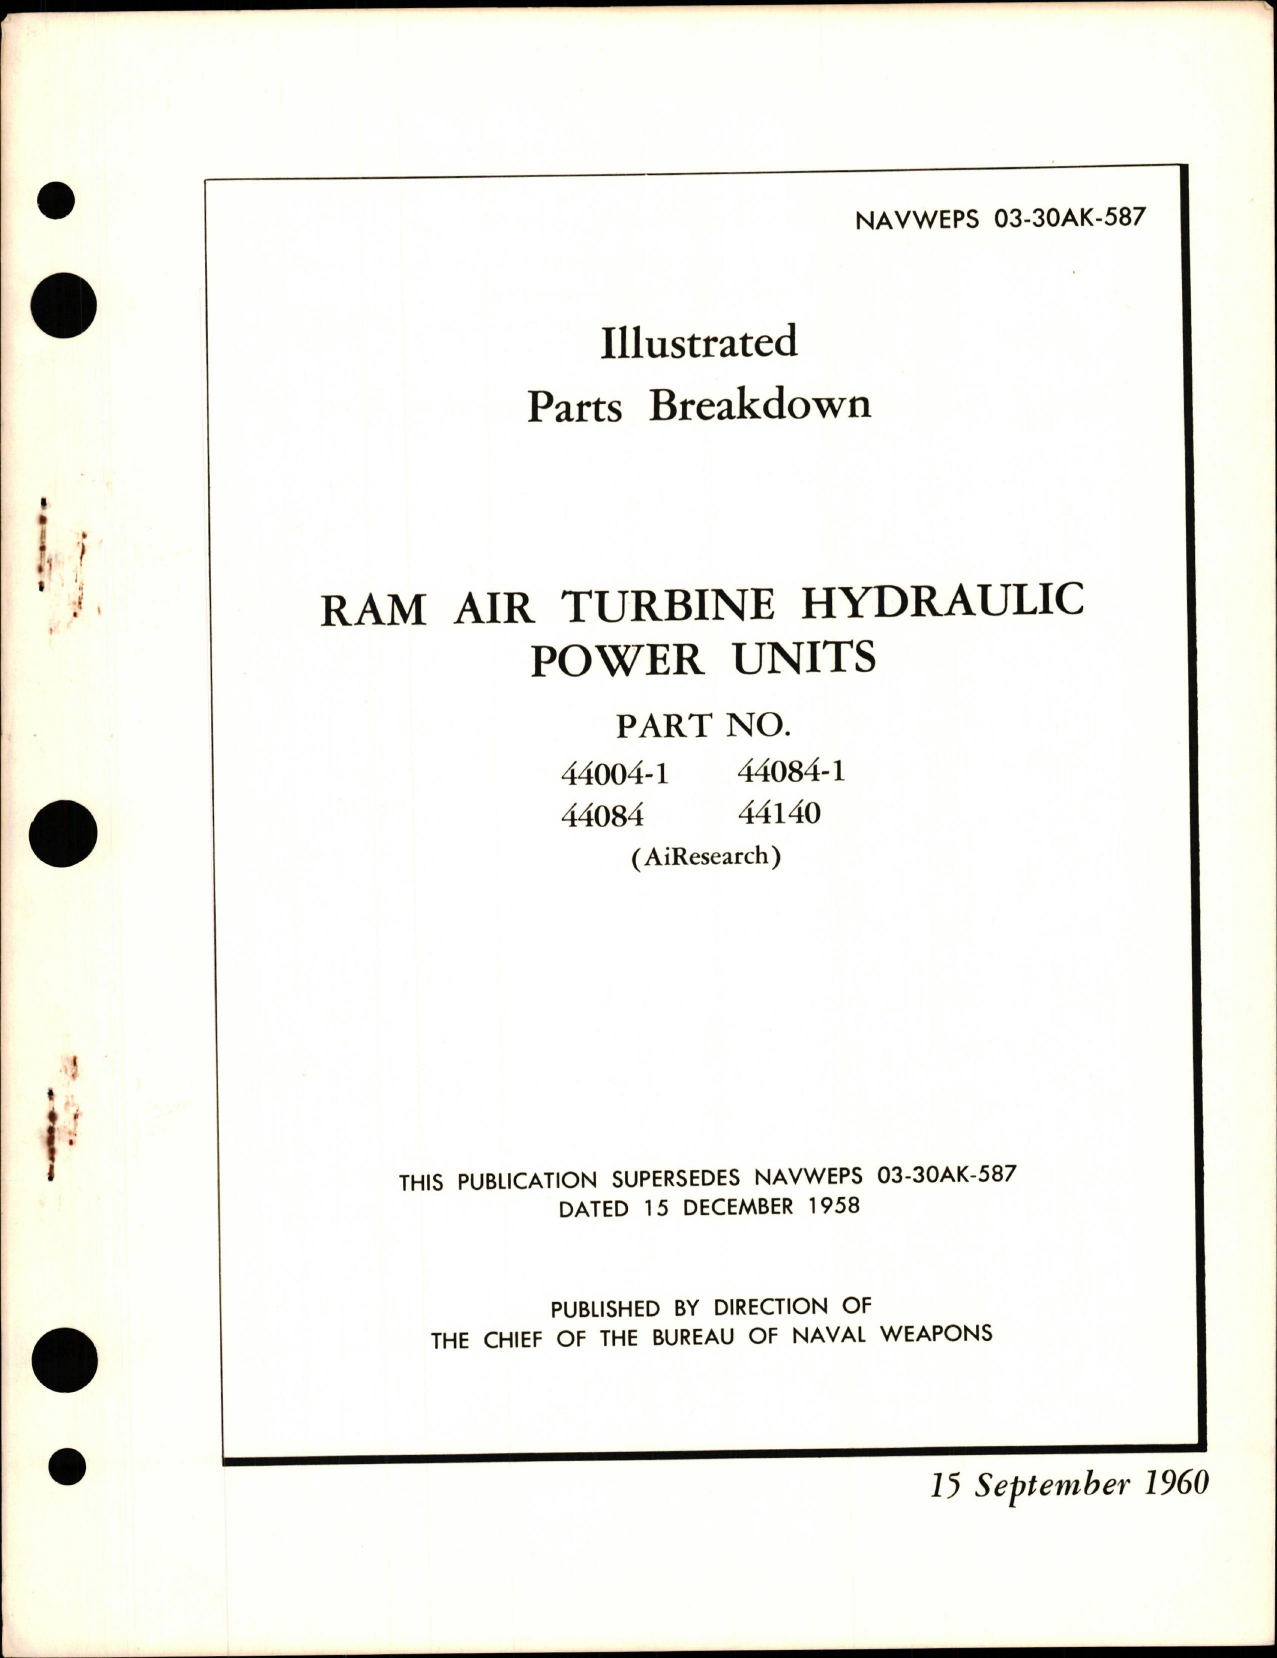 Sample page 1 from AirCorps Library document: Illustrated Parts Breakdown for Ram Air Turbine Hydraulic Power Units - Parts 44004-1, 44084, 44084-1, and 44140 